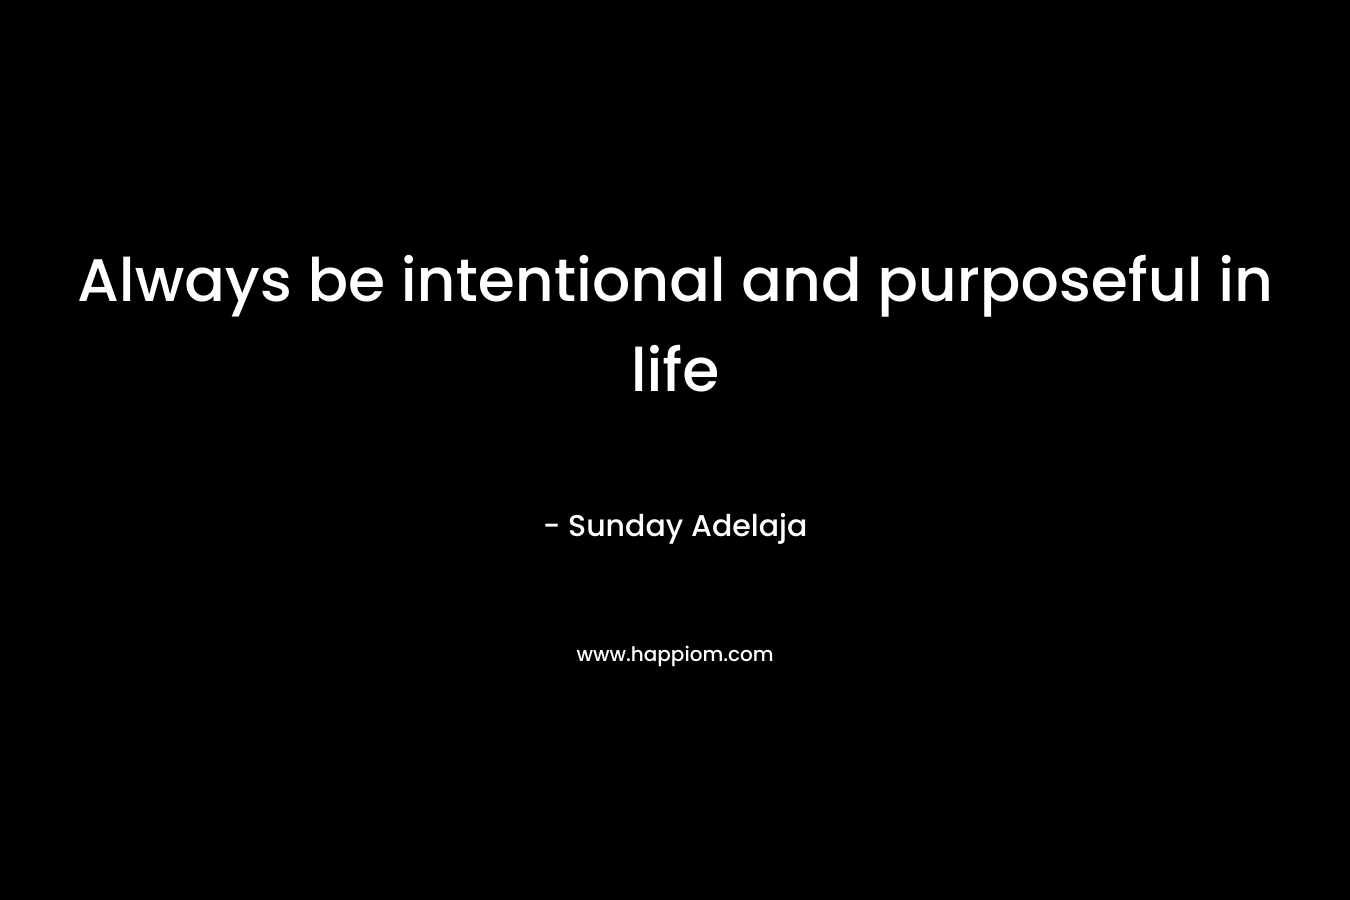 Always be intentional and purposeful in life